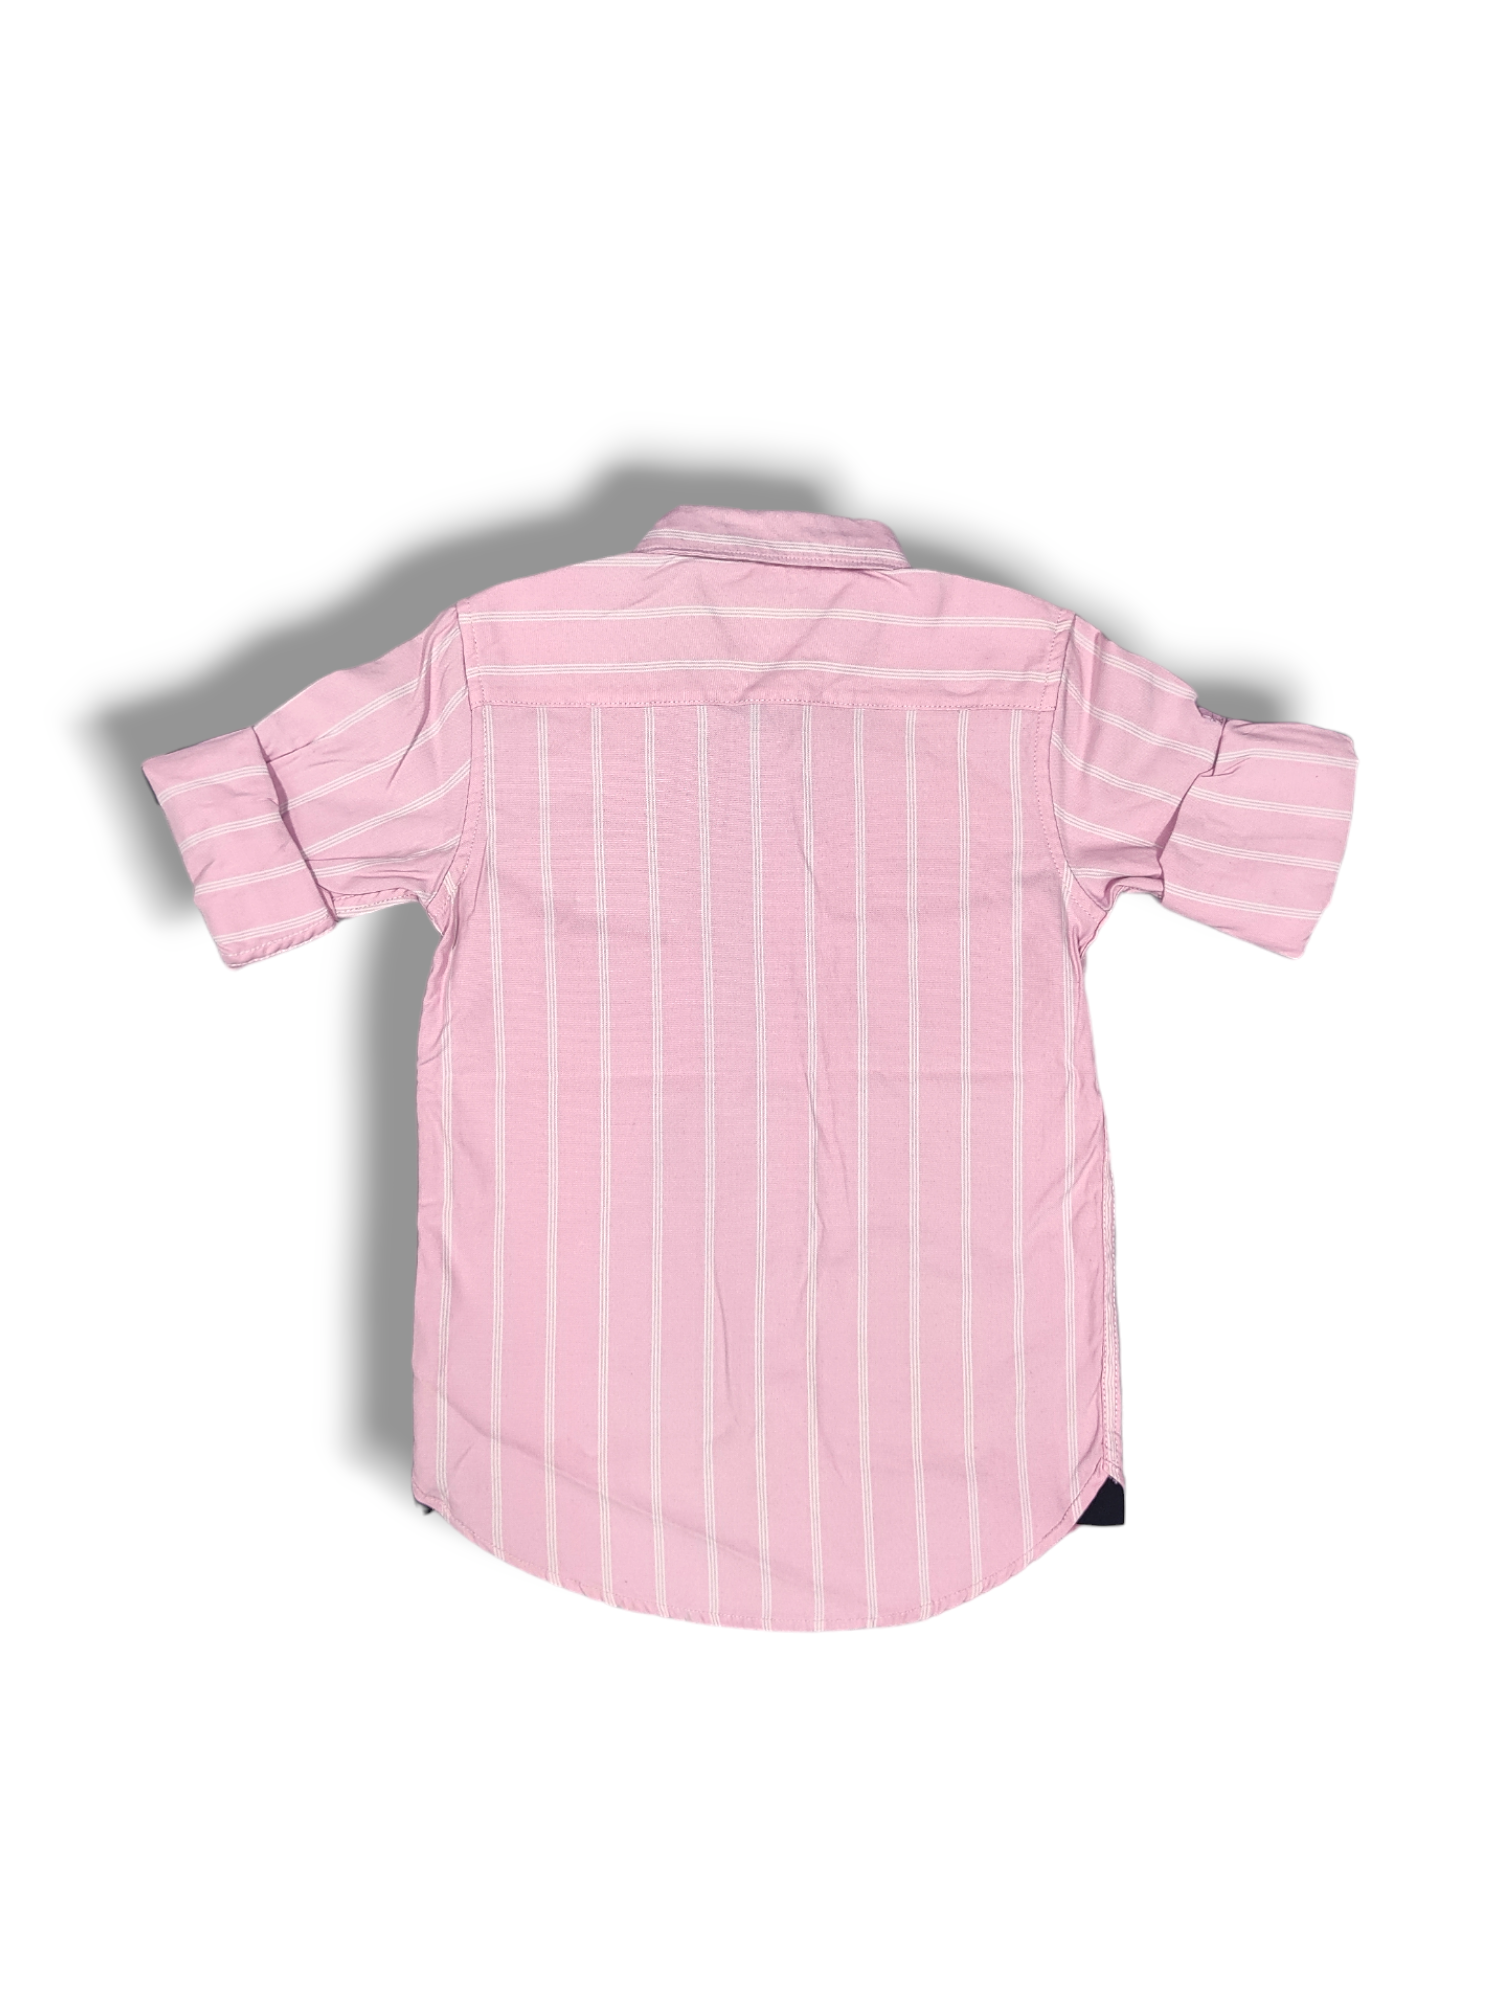 R20 Pink Checked Boys Full Sleeve Shirt / Boys Checked Shirt without Pocket